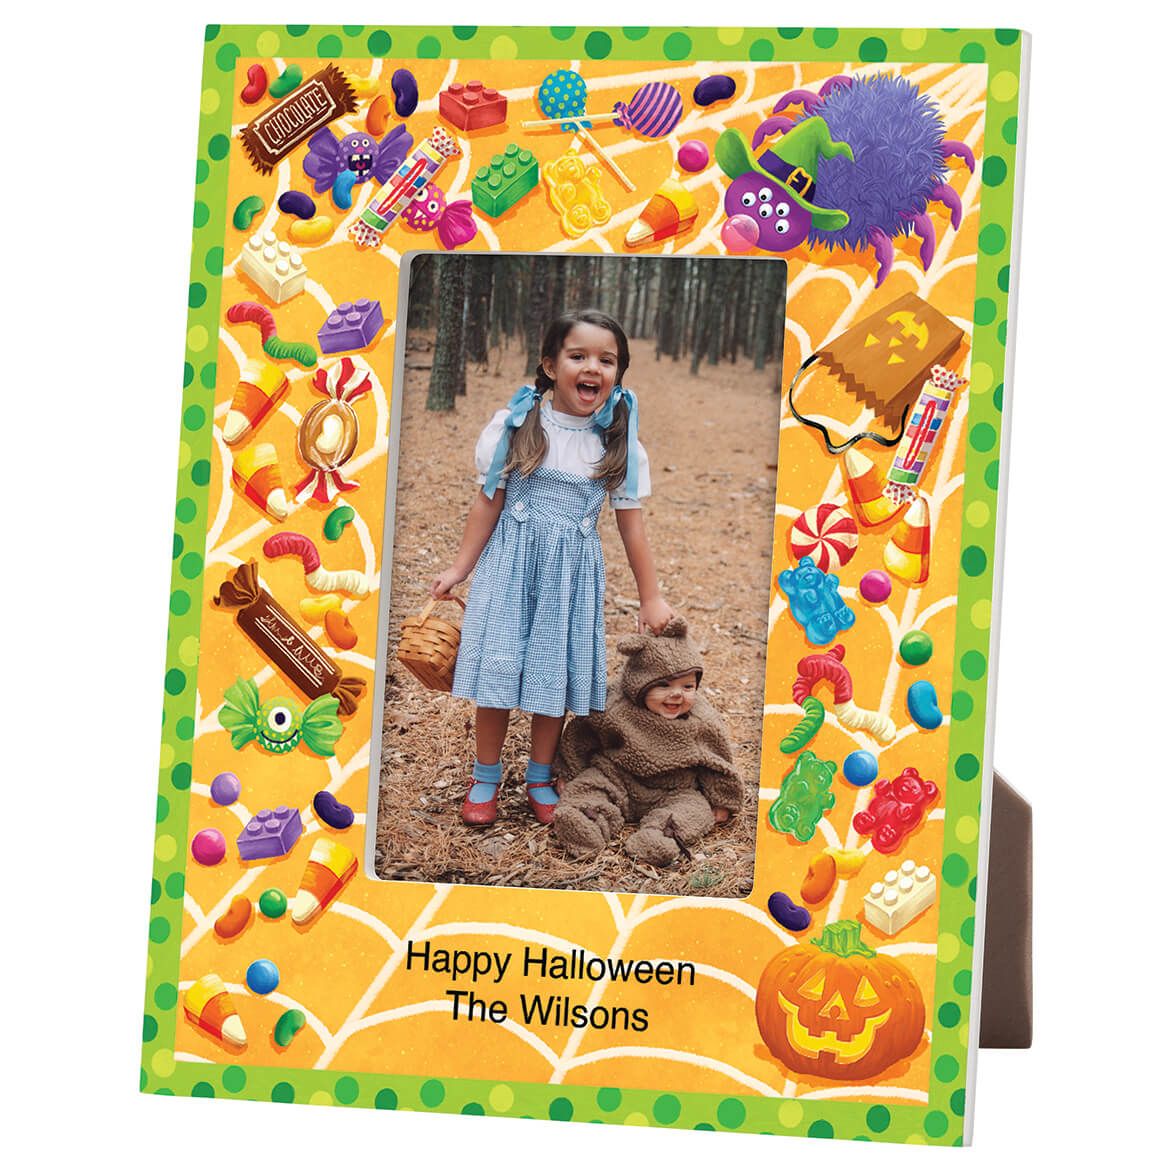 Personalized Halloween Goodies Frame + '-' + 365635